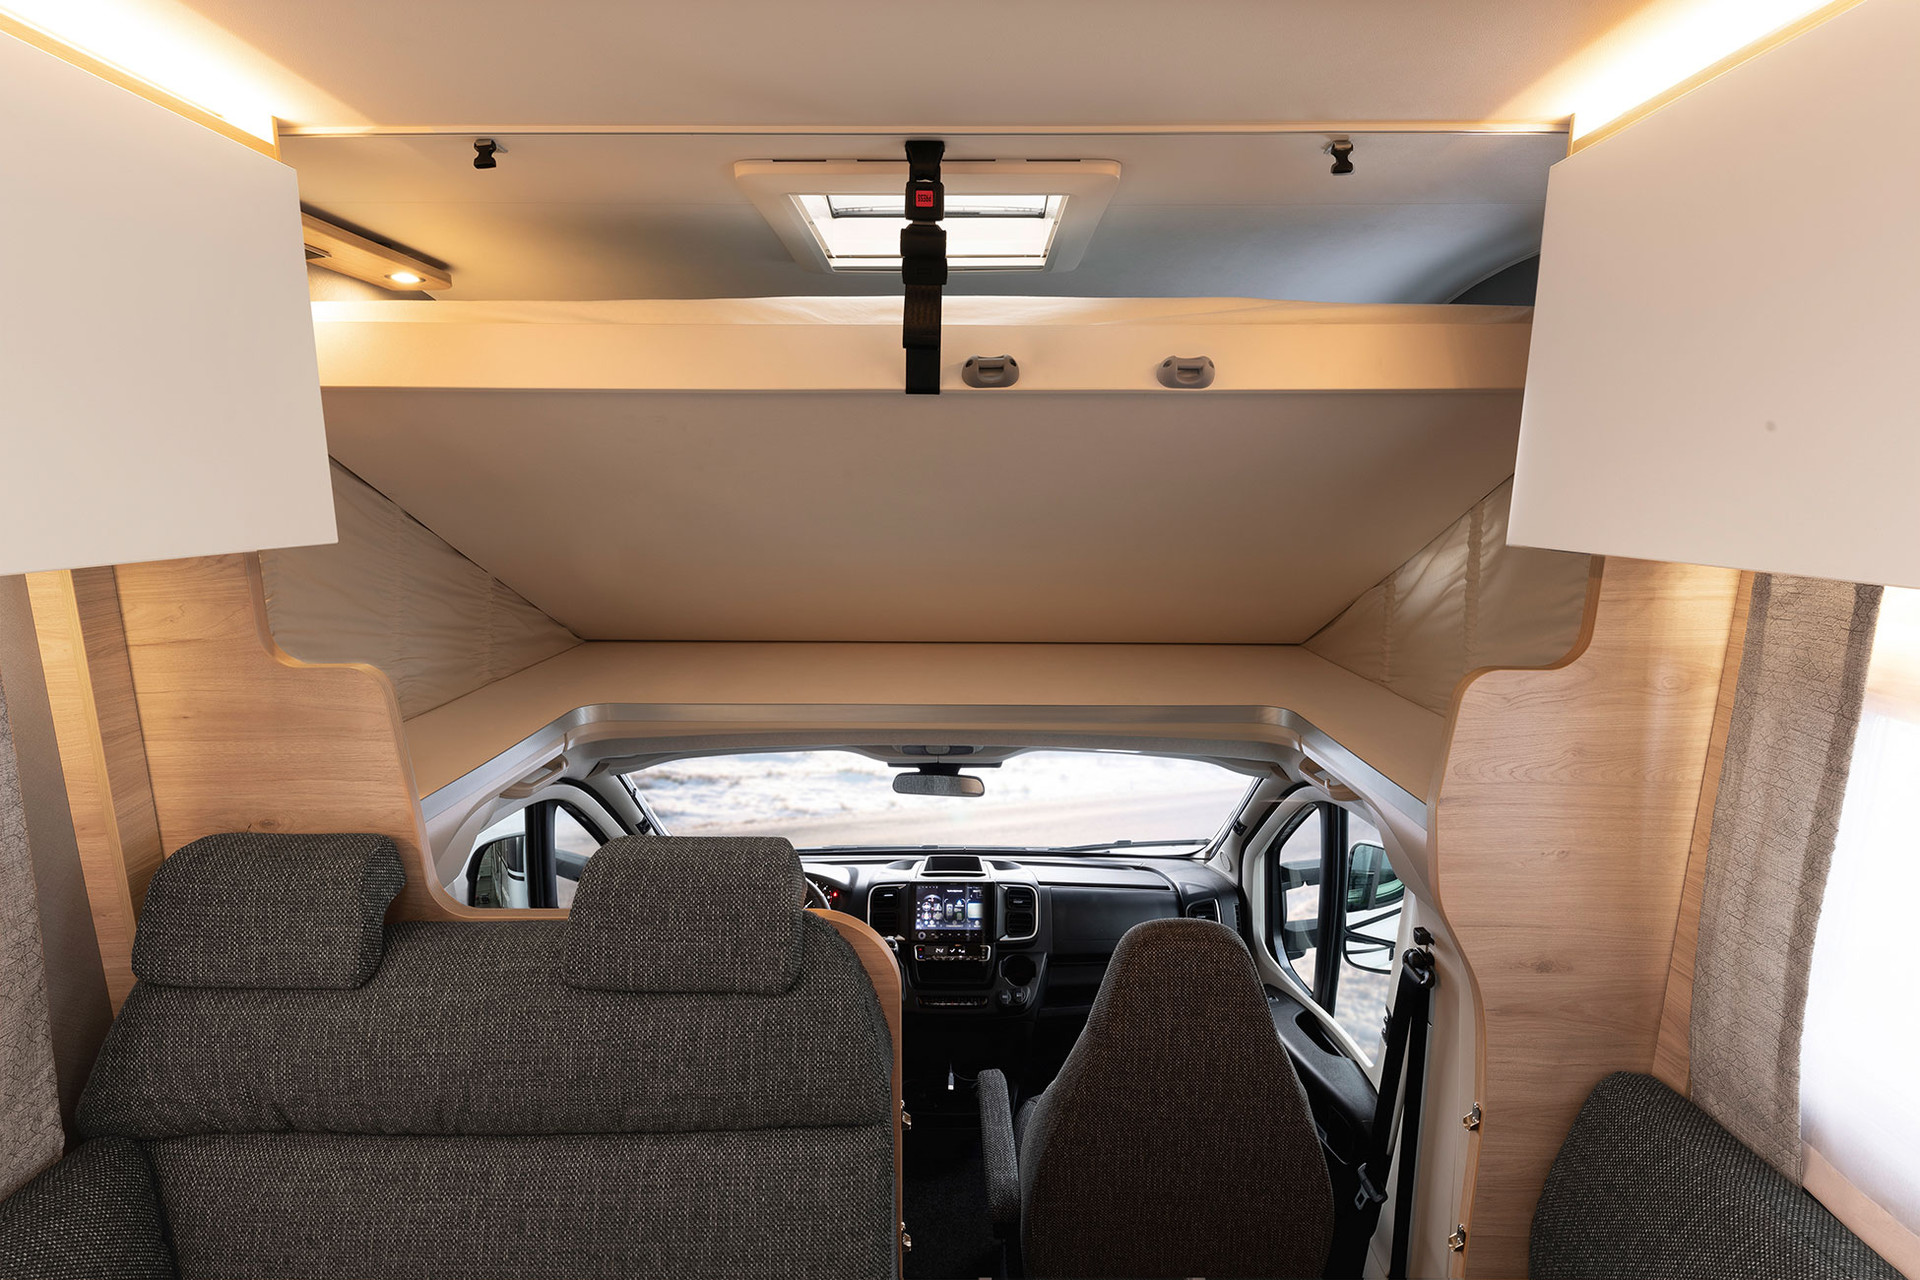 The overcab bed base can be folded up for easy access to the cab.